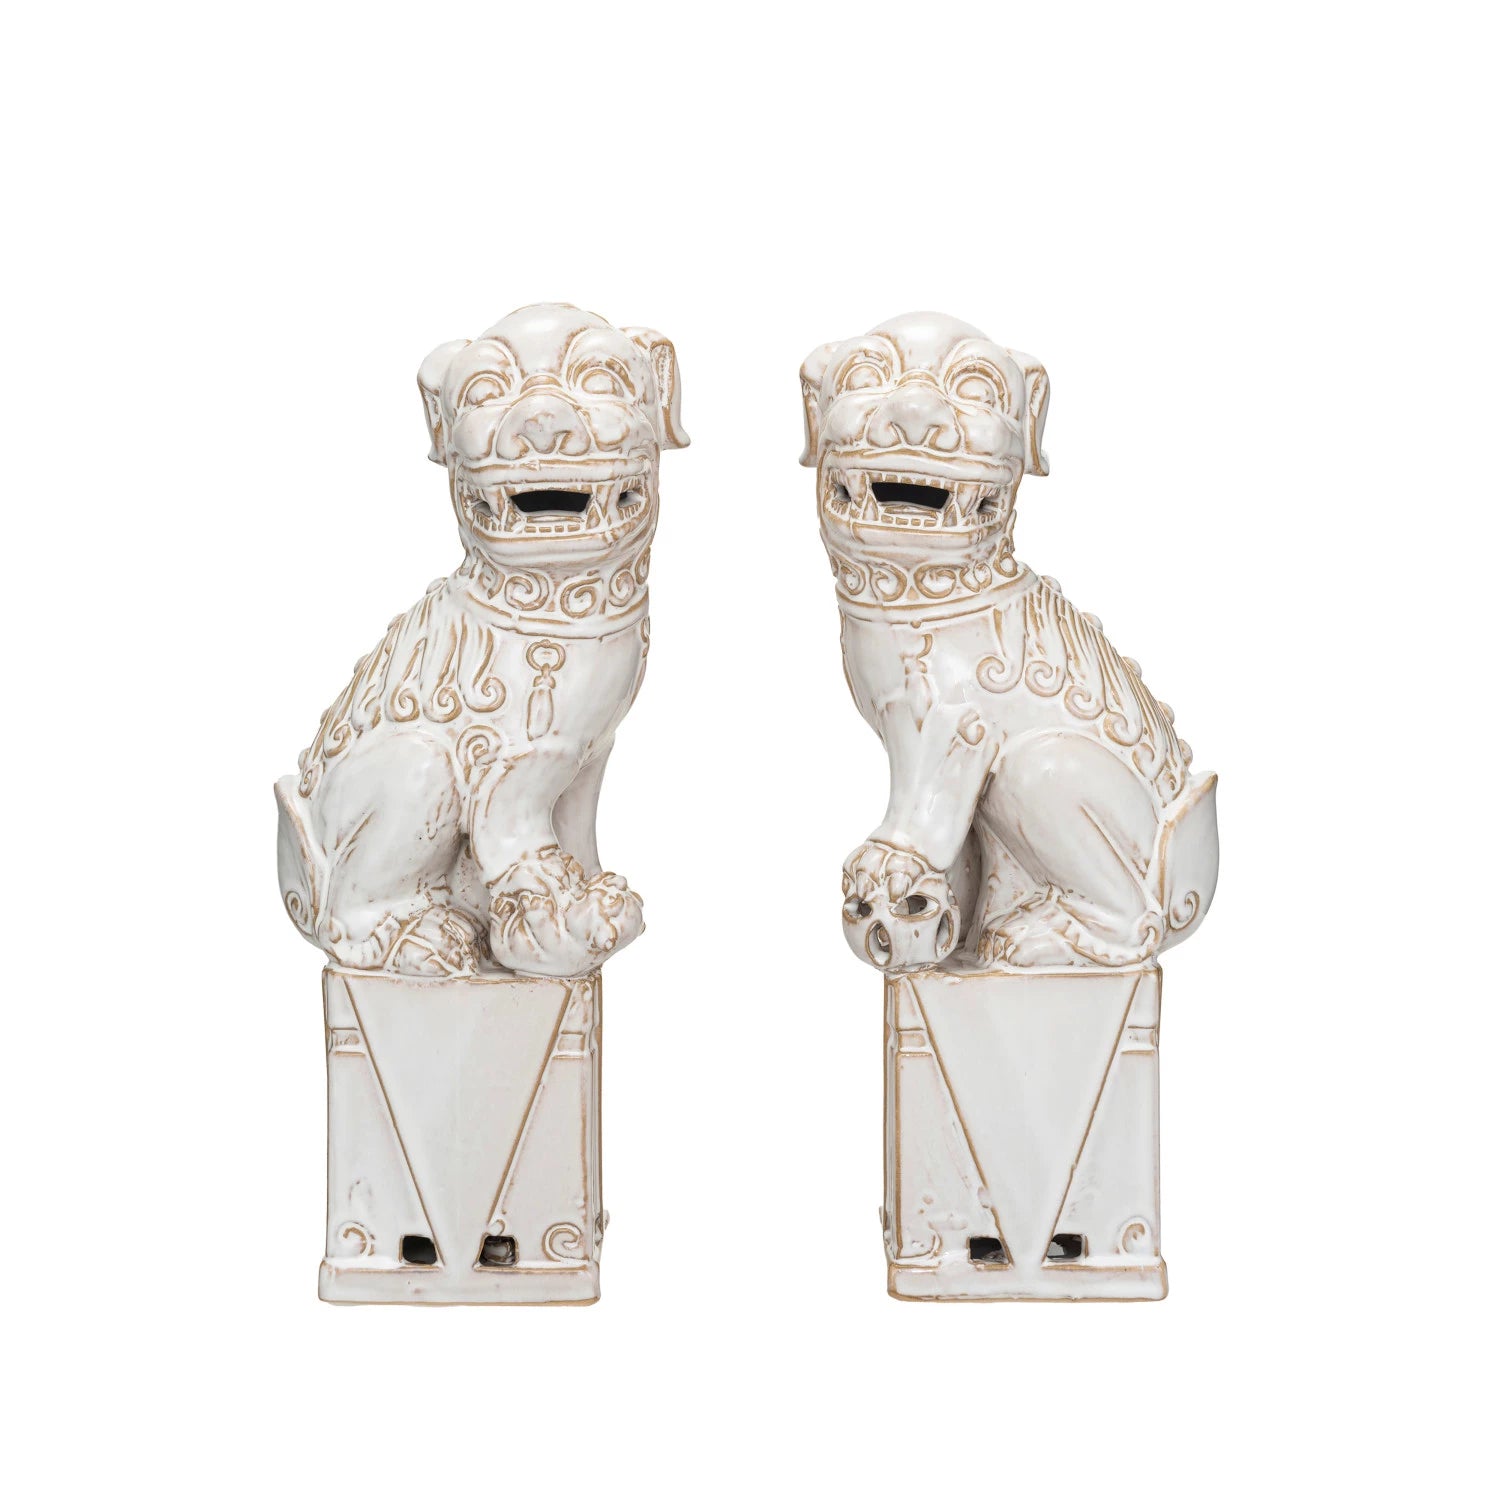 Vintage Reproduction Foo Dog Décor, Style Options